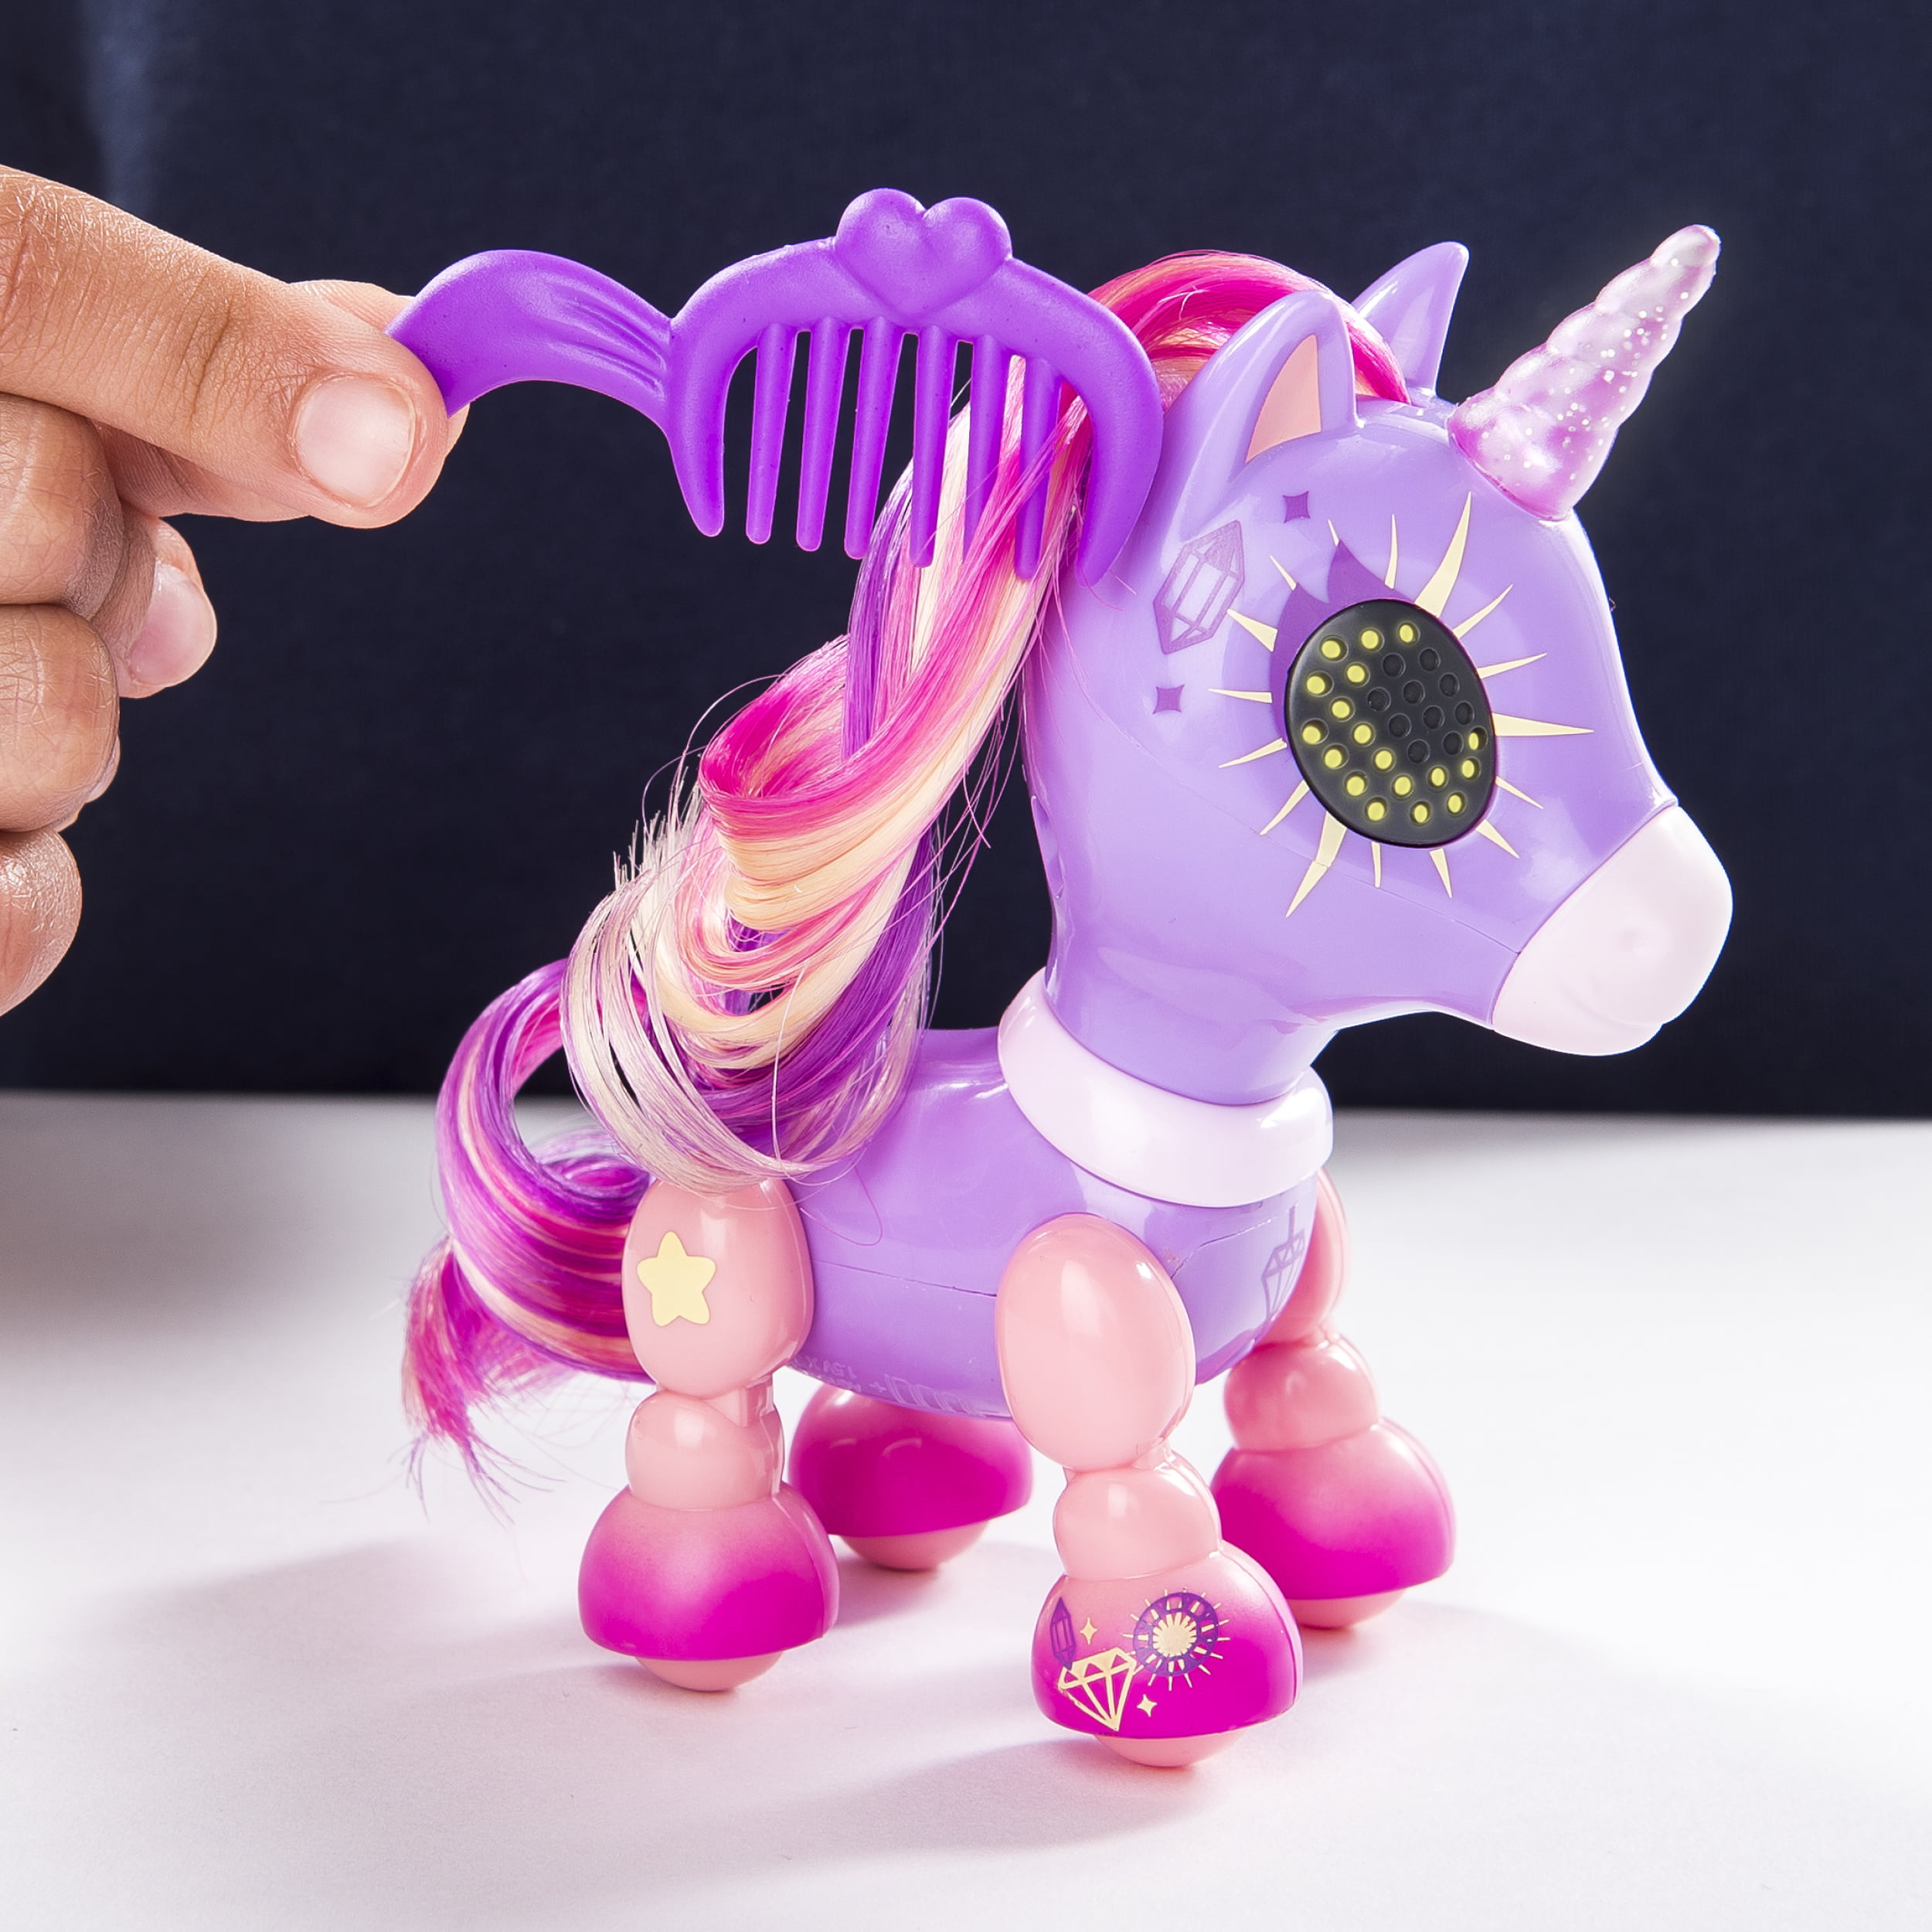 Free Shipping Zooner Zupps Tiny Light-Up Horn Unicorns Figure Crystal 4 